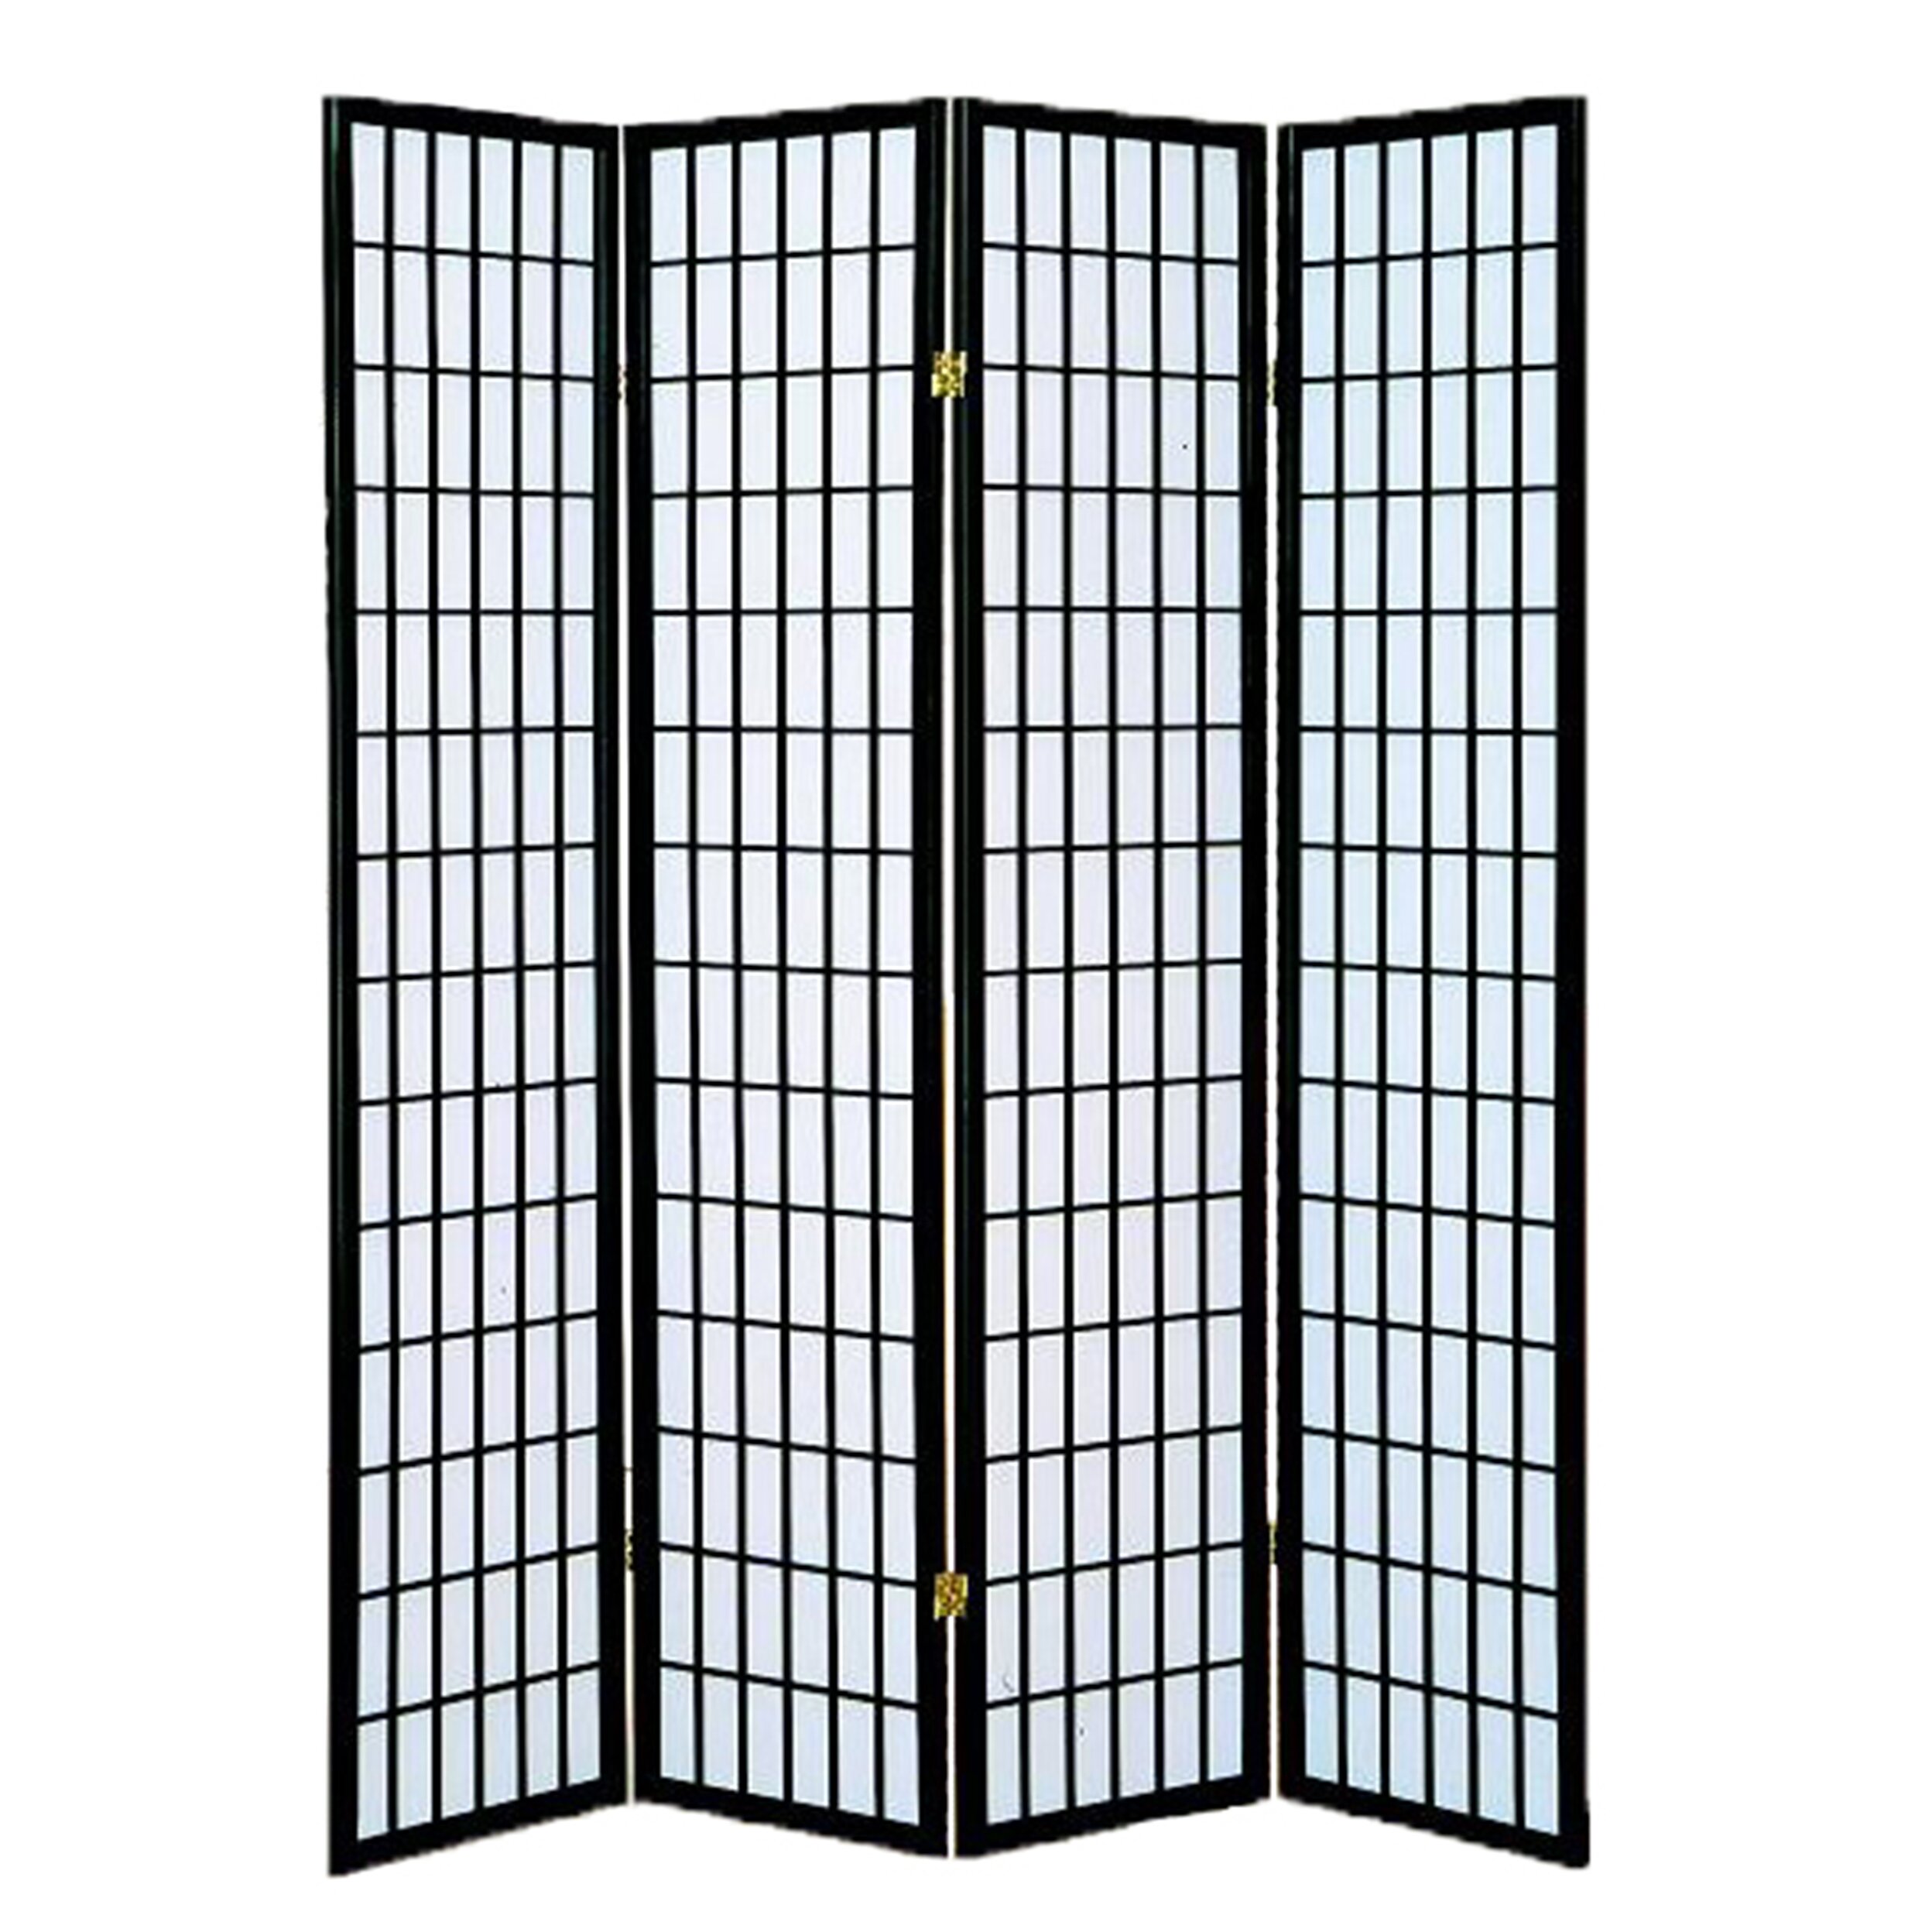 Vavra 70" x 69" 4 Panel Room Divider by World Menagerie